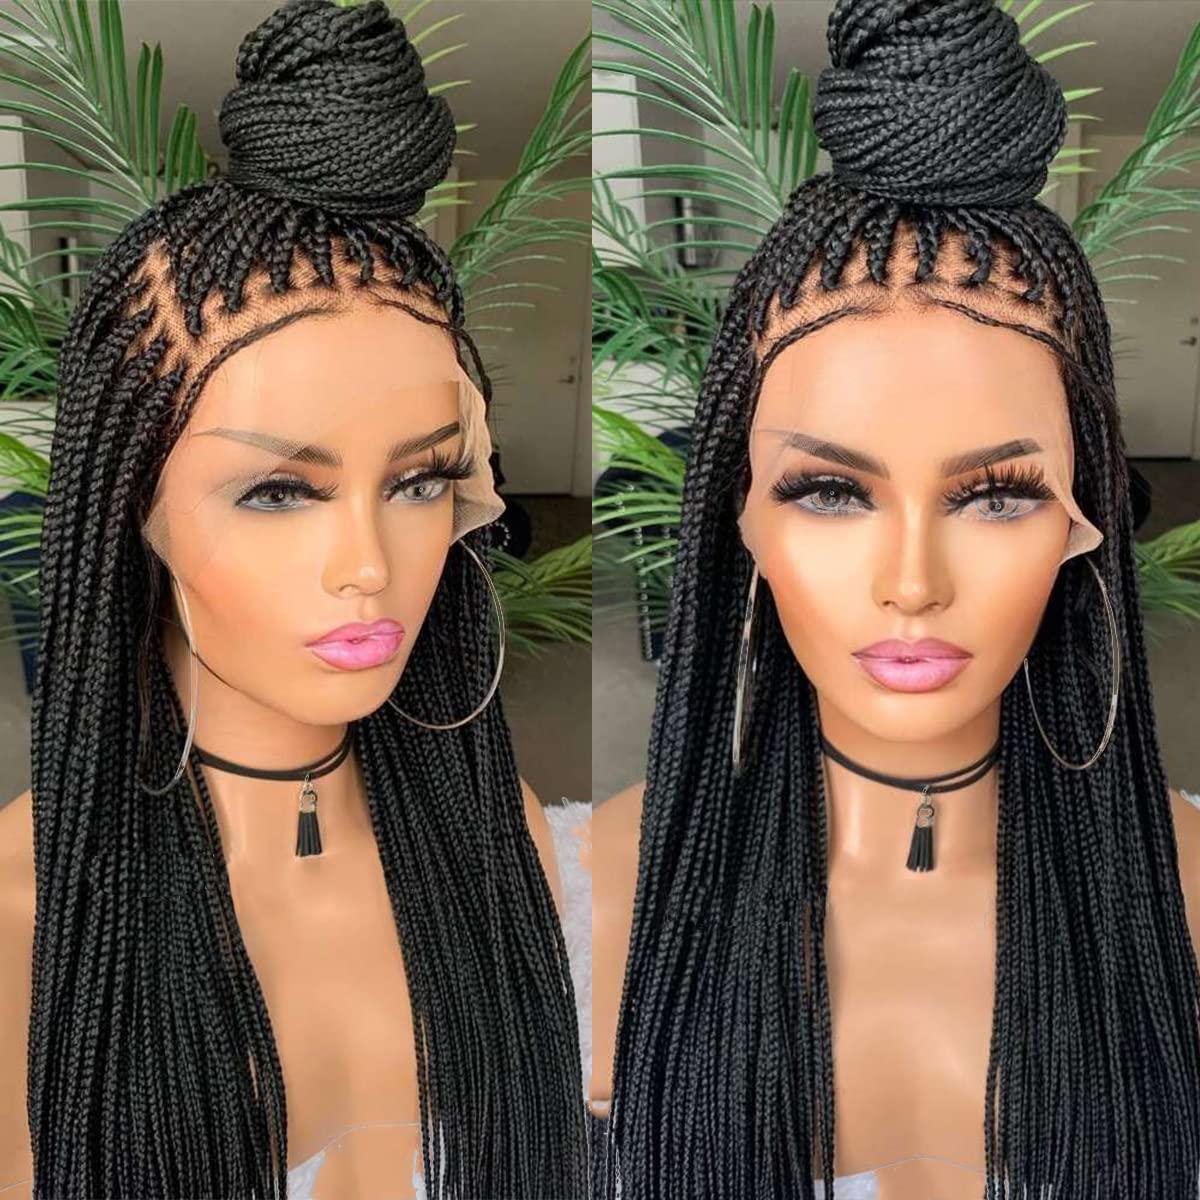 Ombre Knotless Braids Wigs for Women Braided Lace Front Wig Braided Lace  Wigs Braided Full Lace Wigs Braided Wigs for Black Women Dreadlocks 